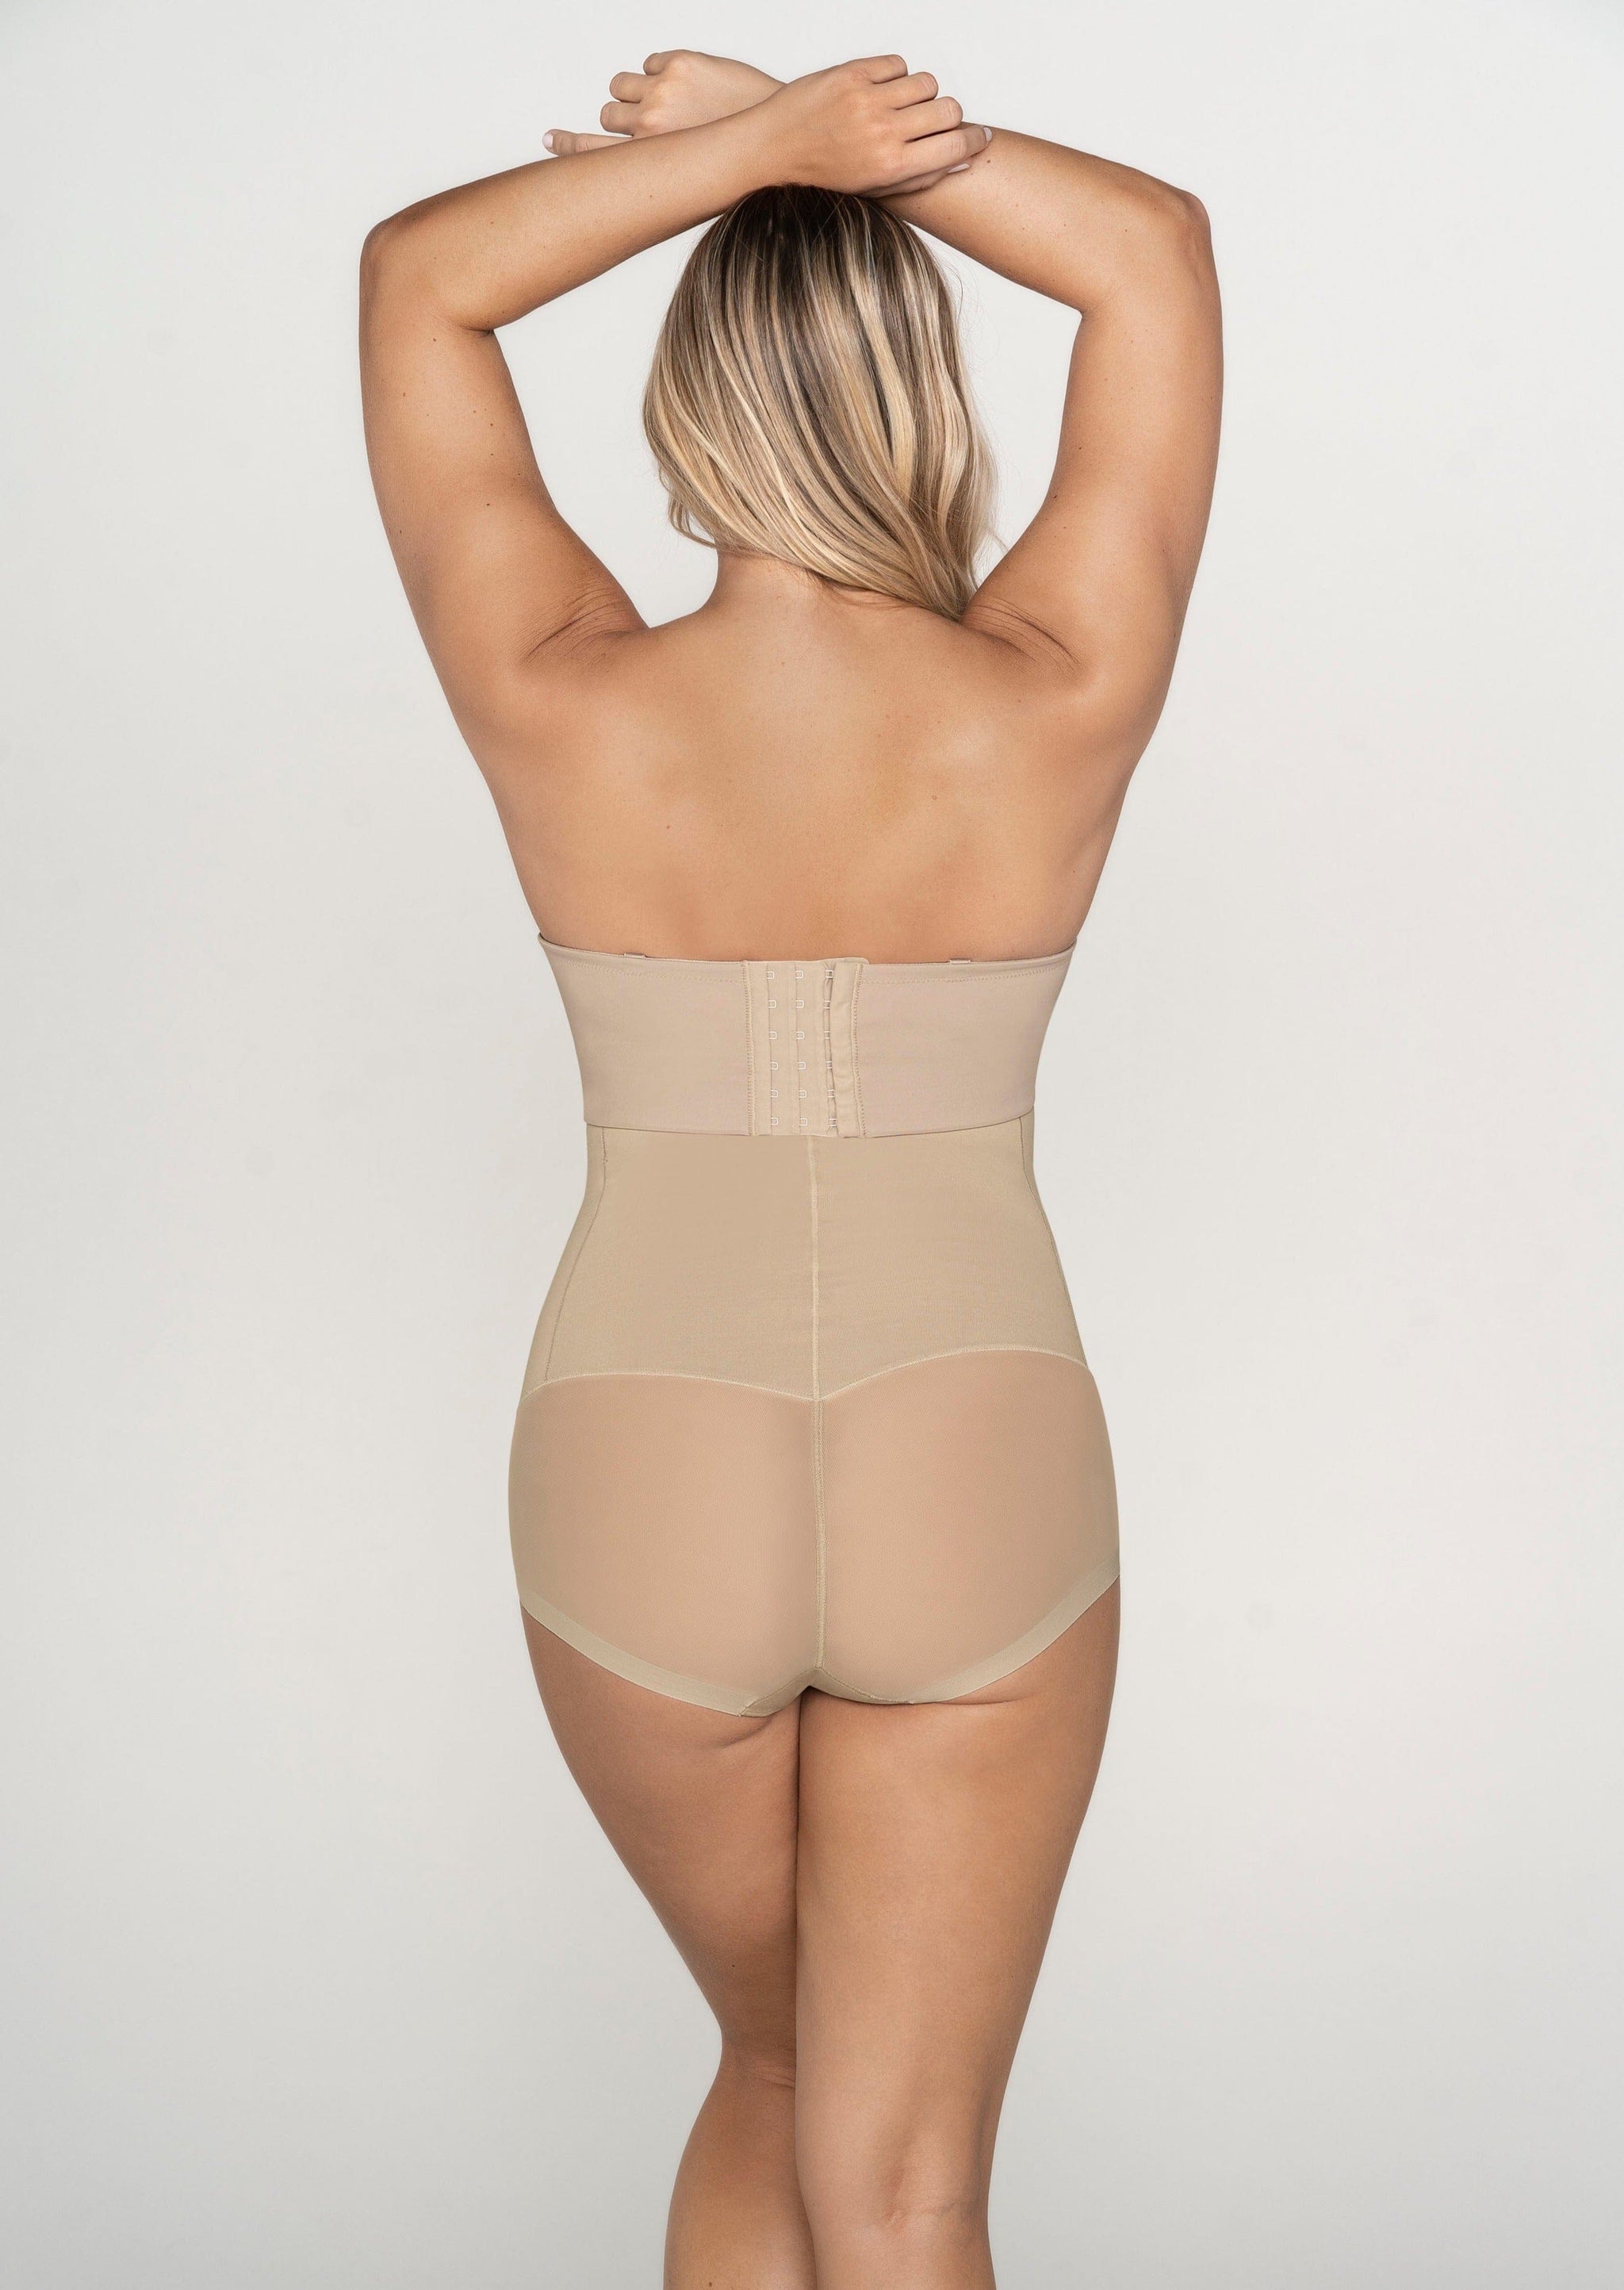 Extra High-Waisted Sheer Bottom Sculpting Shaper Panty - Nude